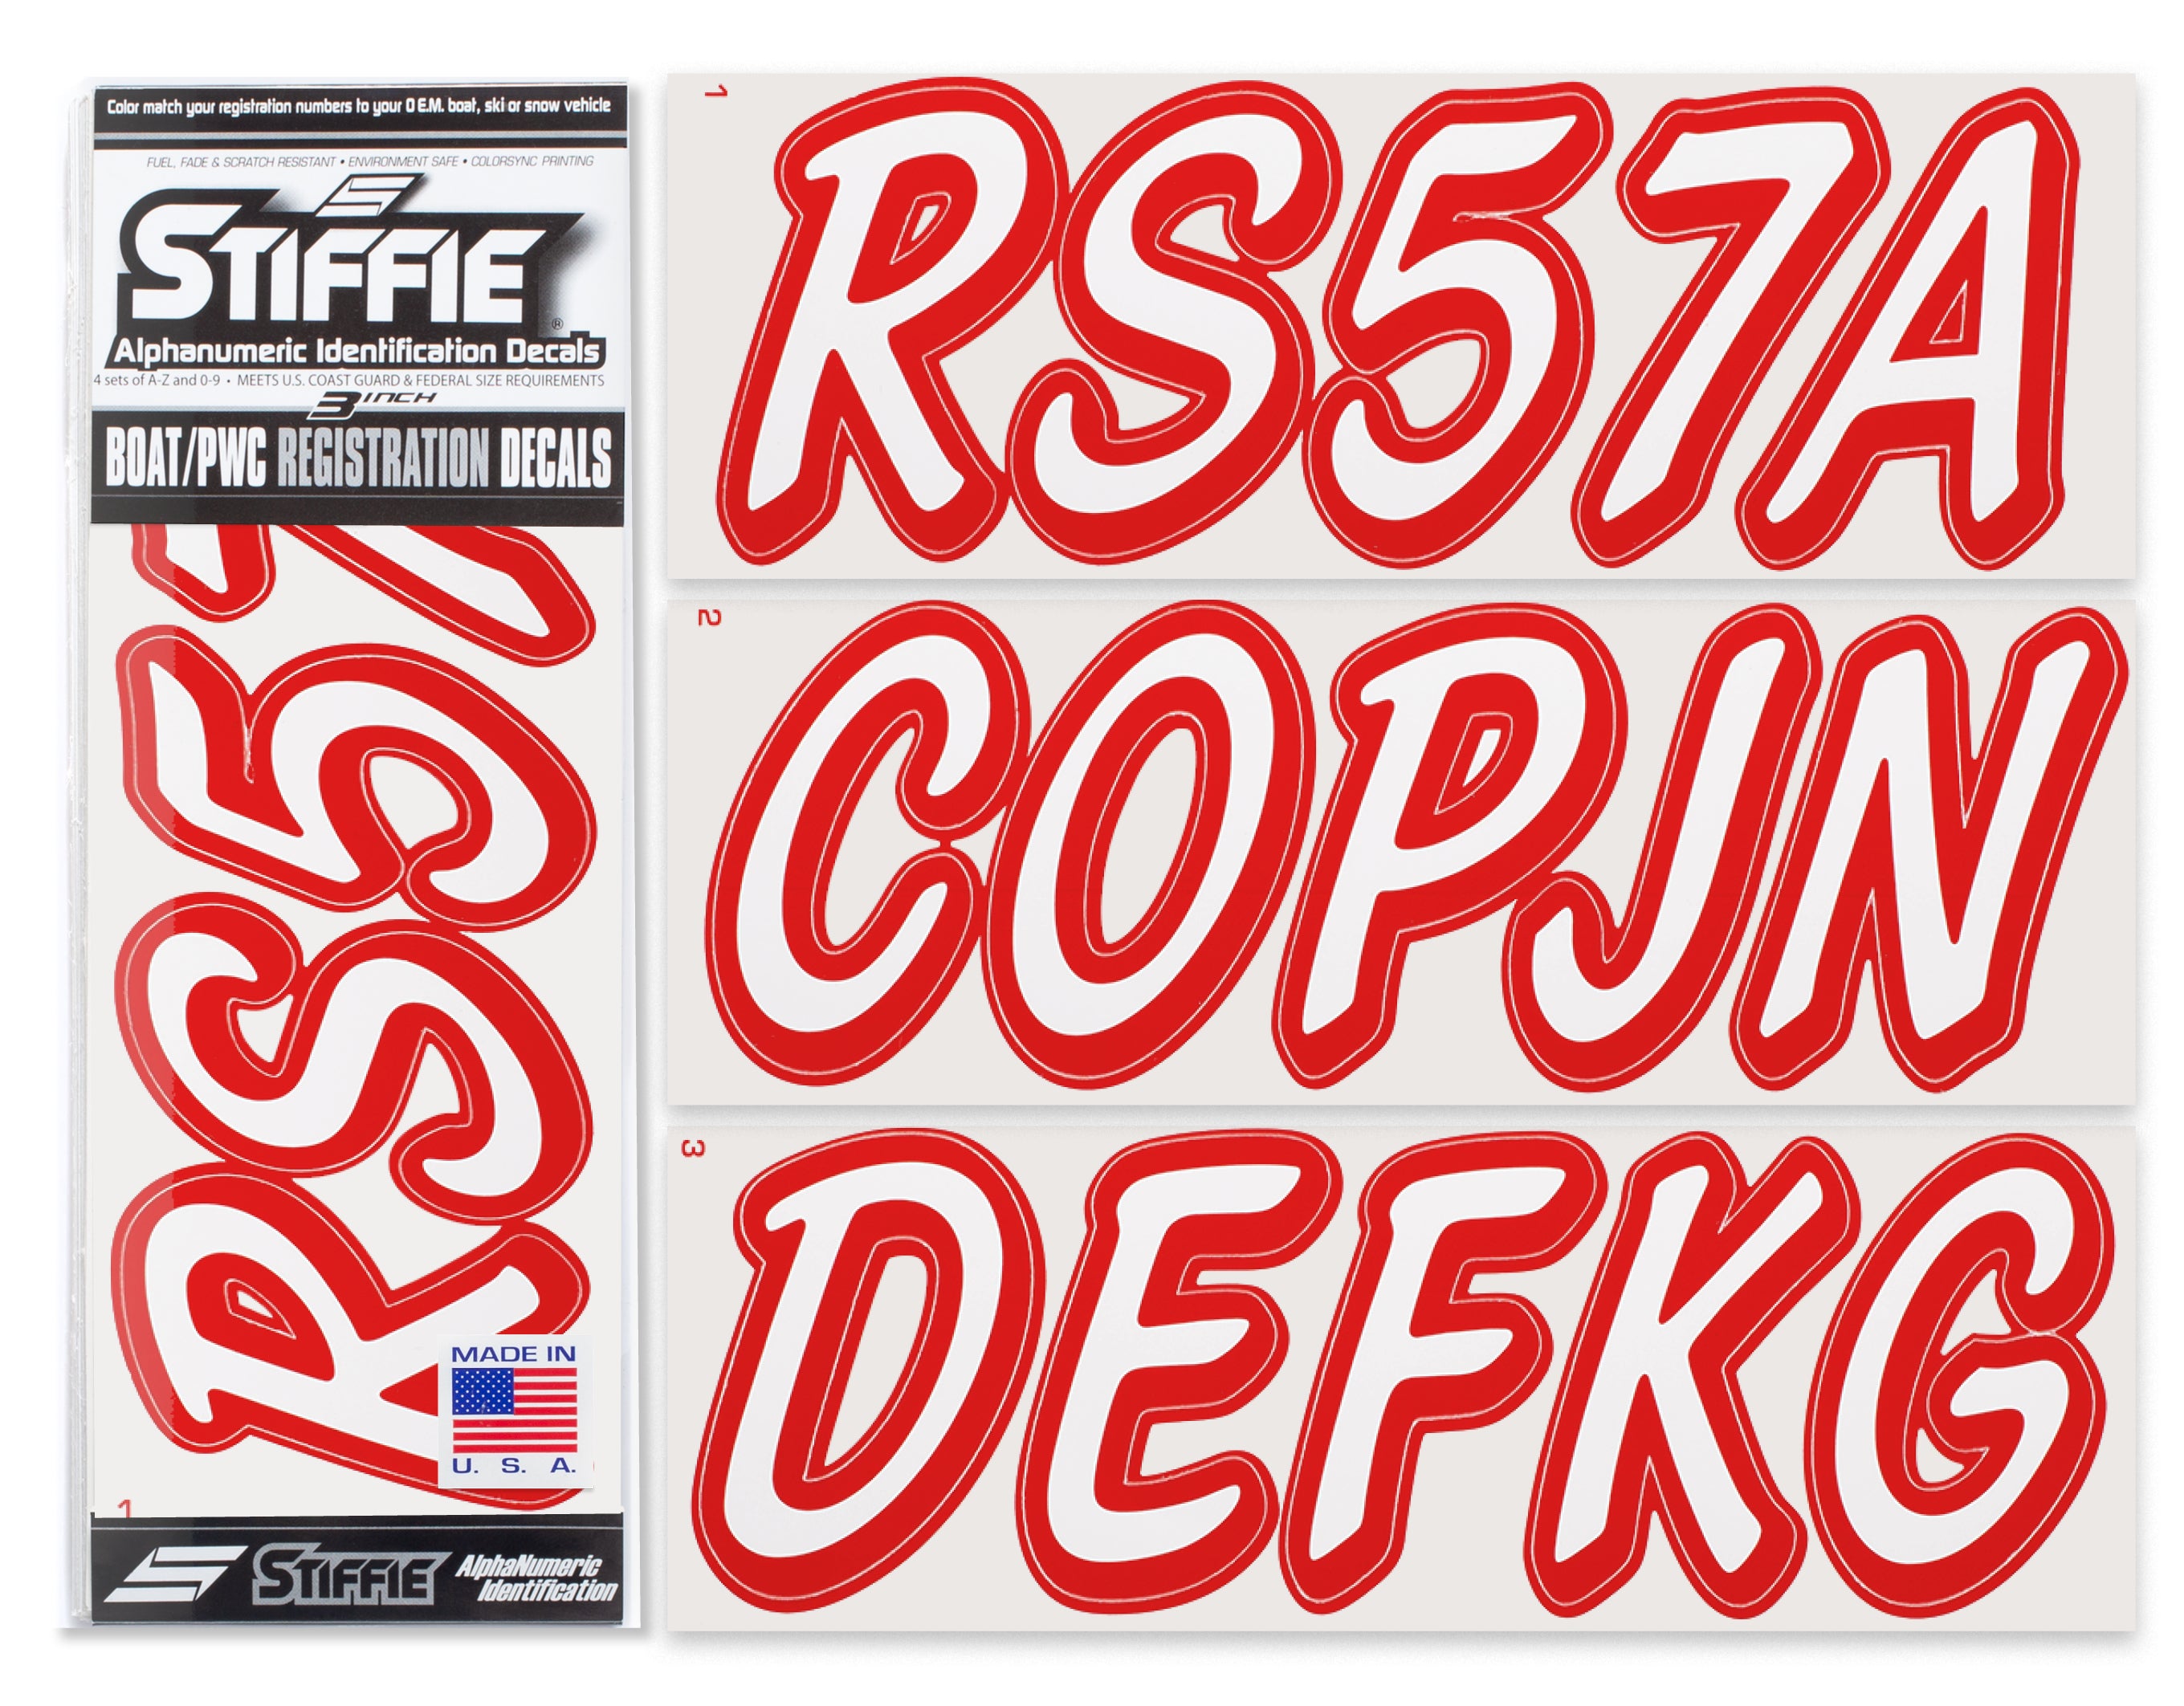 STIFFIE Whipline Solid White/Red 3" Alpha-Numeric Registration Identification Numbers Stickers Decals for Boats & Personal Watercraft